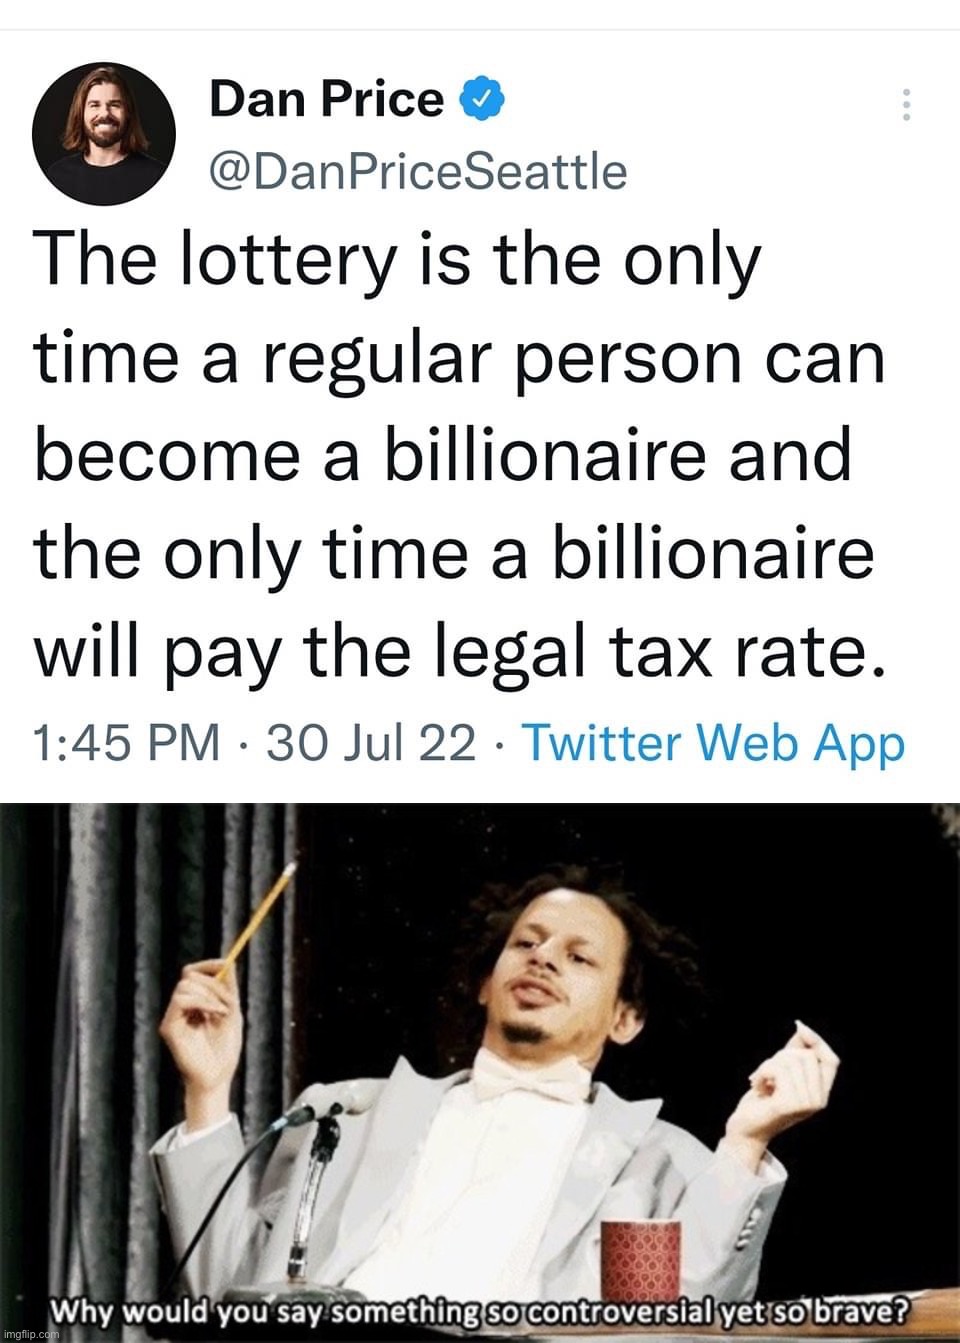 no no he's got a point | image tagged in why would you say something so controversial yet so brave,billionaire,no no he's got a point,lottery,taxes,hmmmm | made w/ Imgflip meme maker